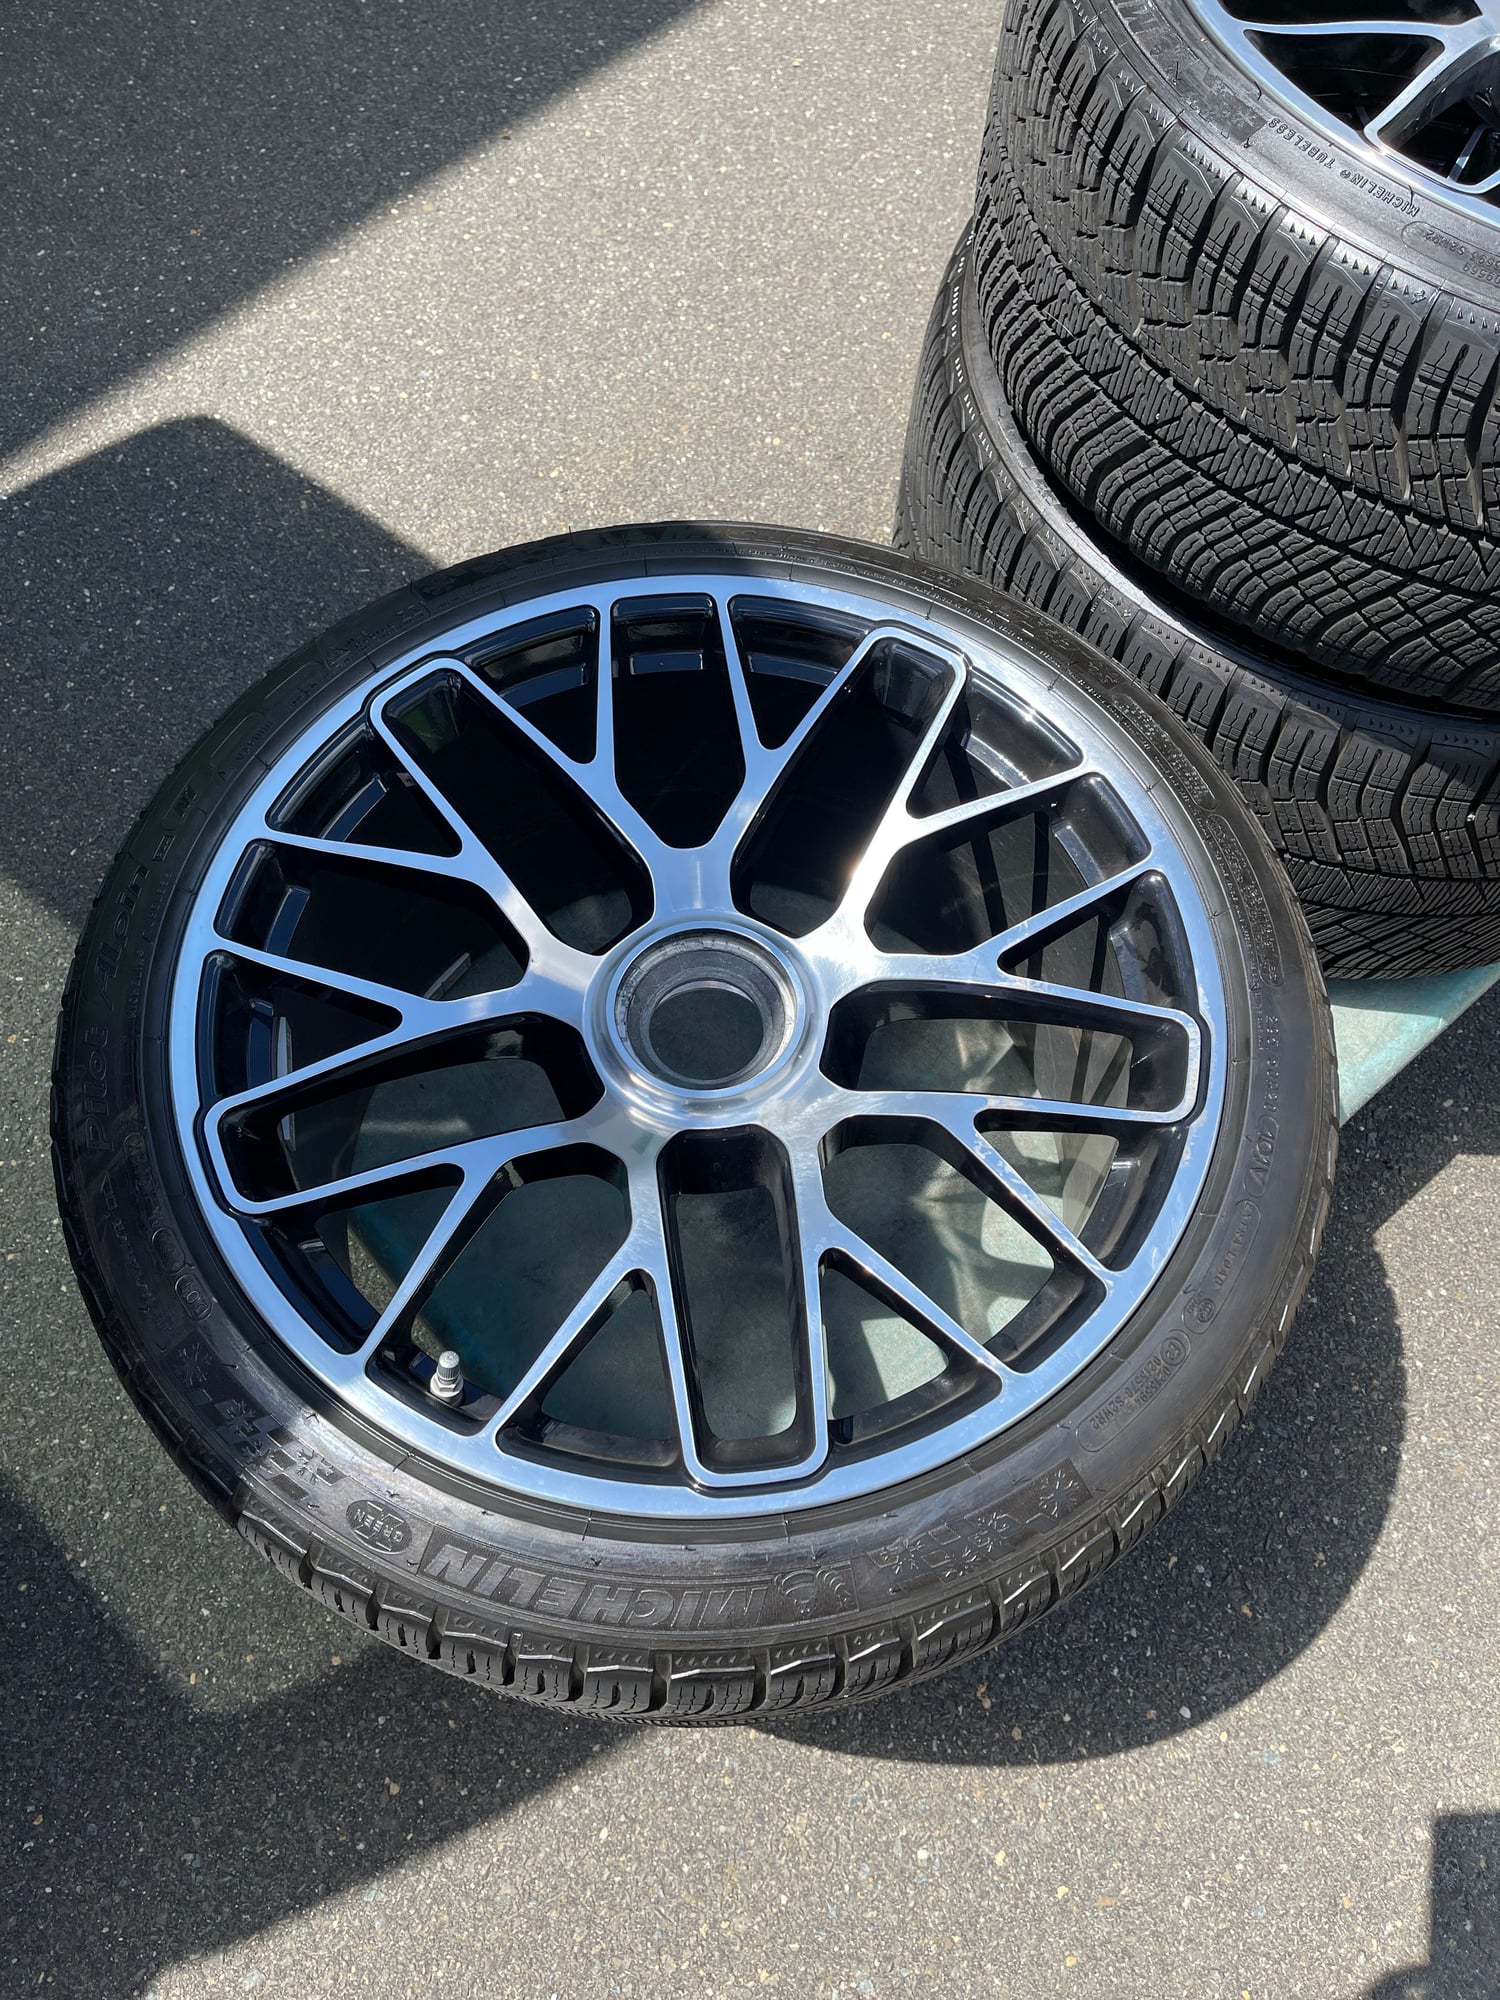 Wheels and Tires/Axles - Porsche OEM 20" Turbo S Wheels and Alpin Winter Tires 991 - Used - 2015 to 2019 Porsche 911 - Ny, NY 10021, United States